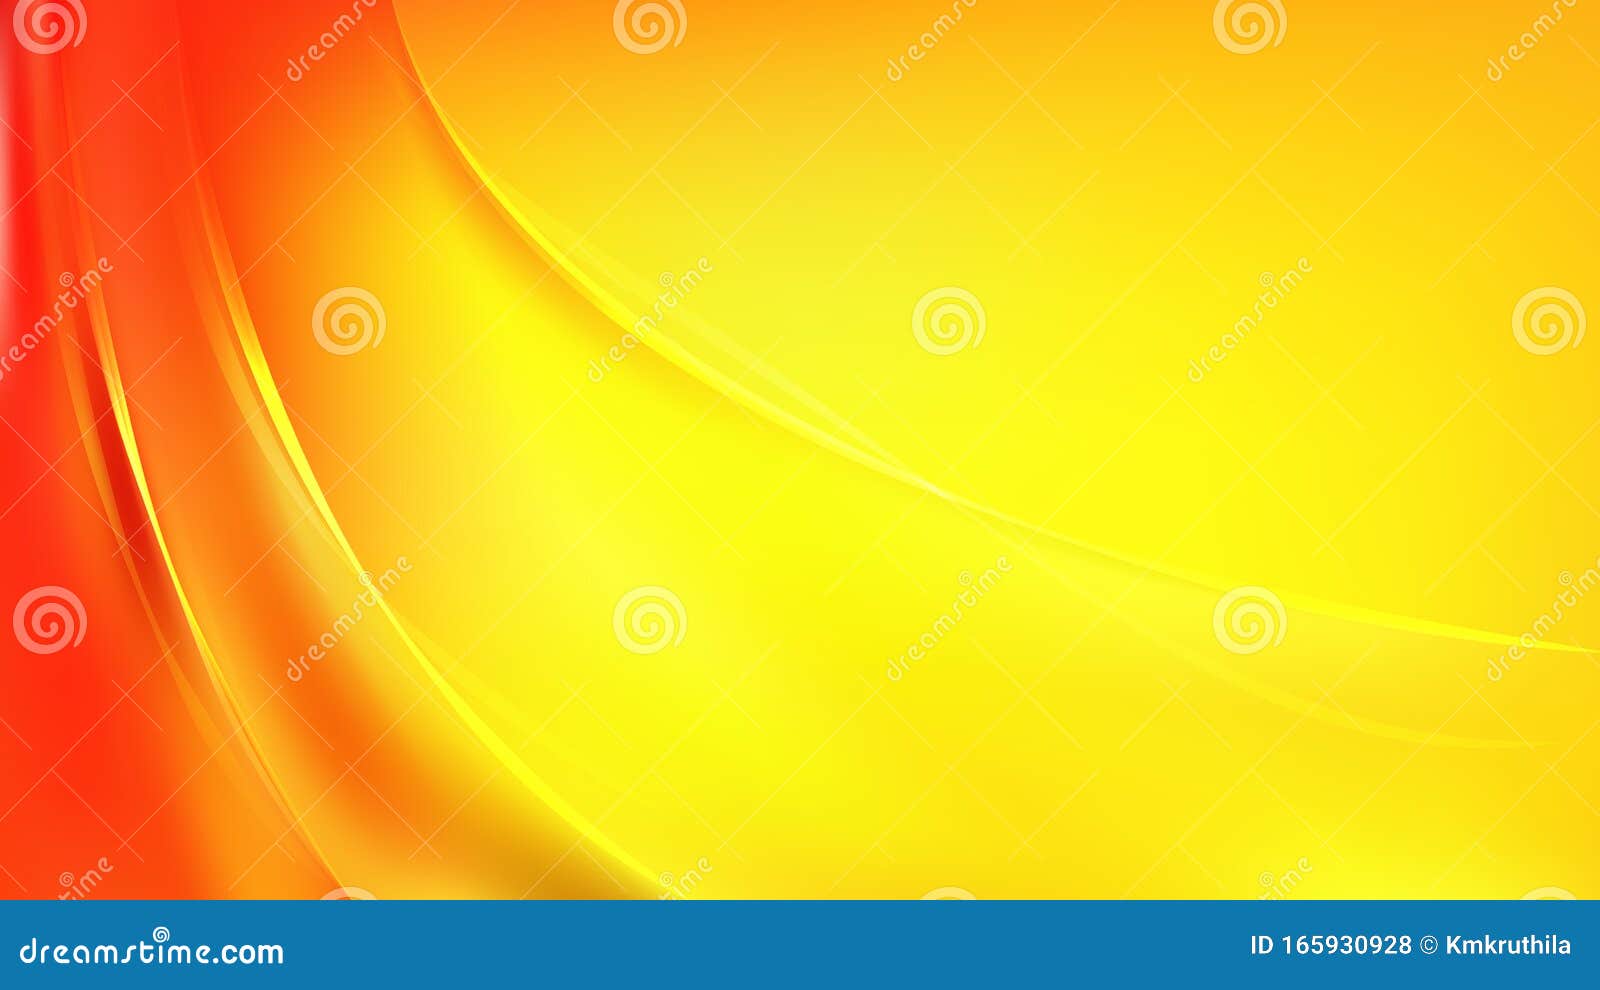 Red and Yellow Abstract Curve Background Vector Image Stock Vector -  Illustration of orange, macro: 165930928